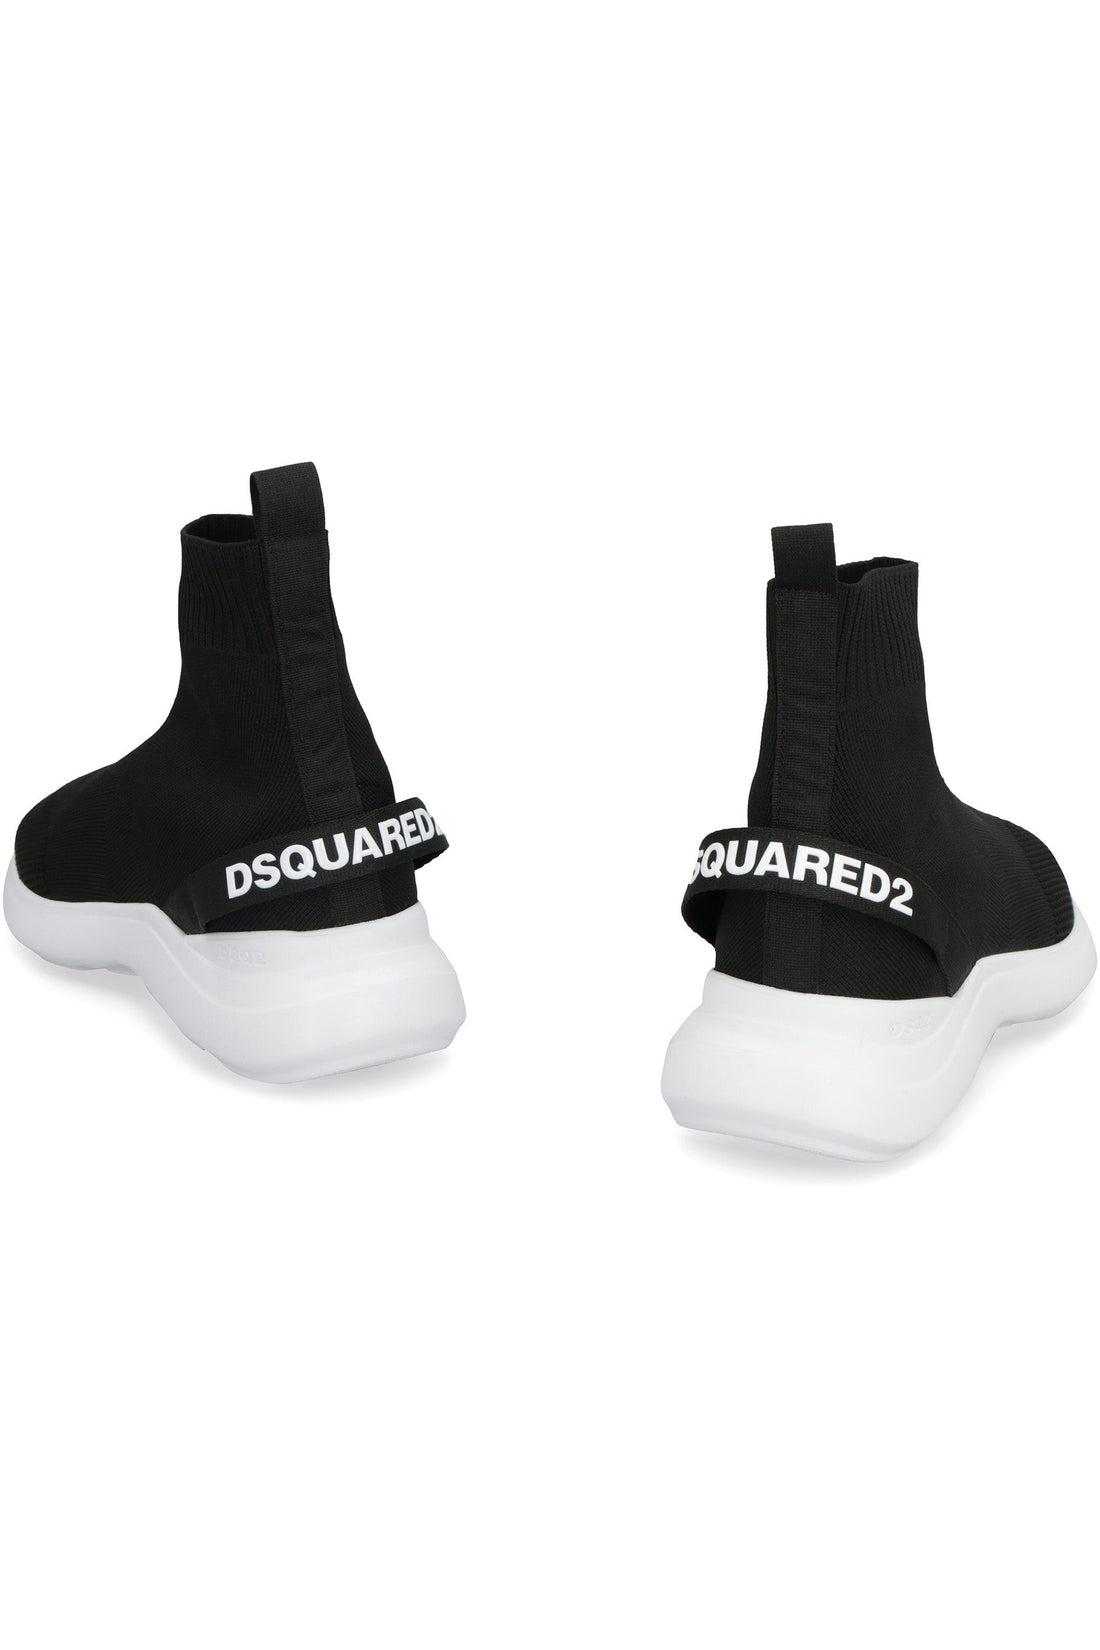 Dsquared2-OUTLET-SALE-Fly knitted sock-sneakers-ARCHIVIST